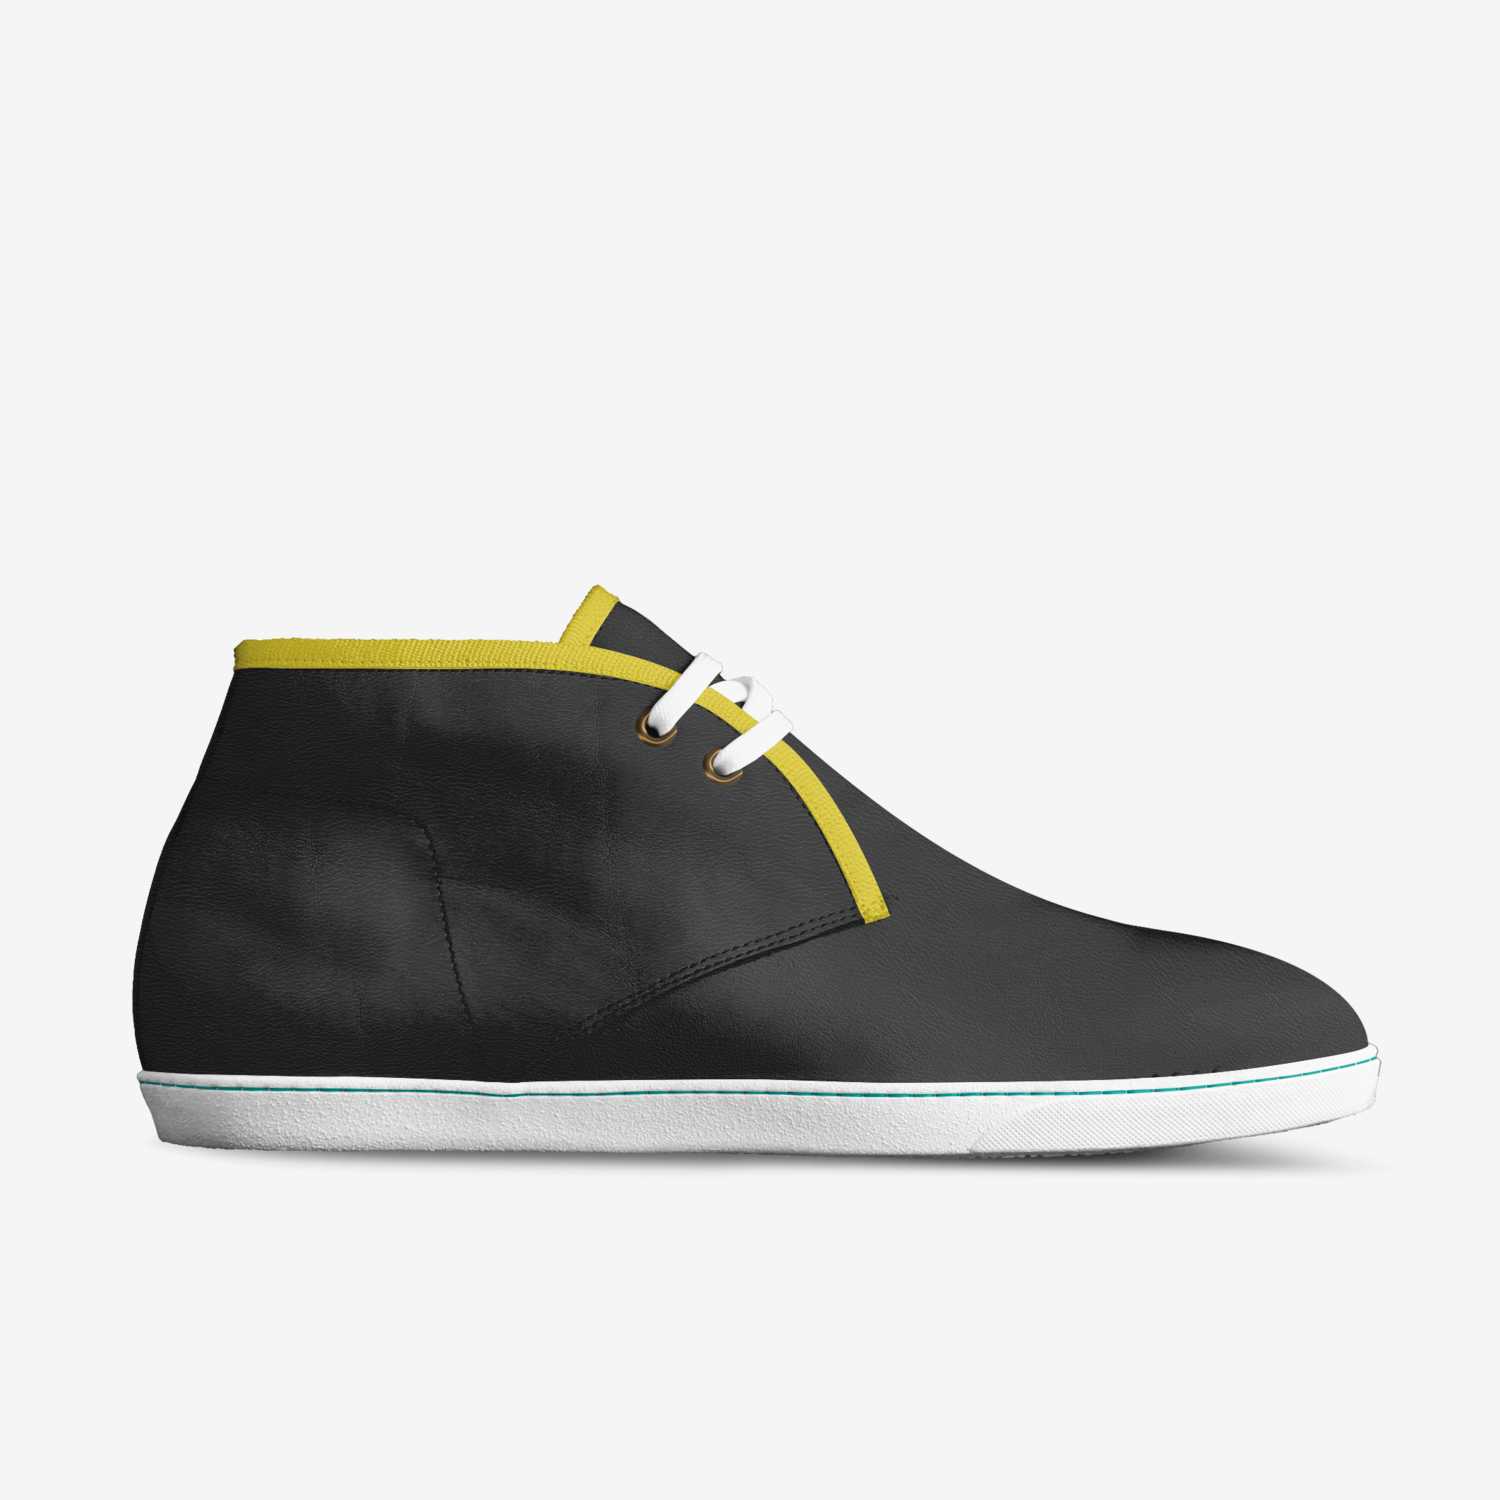 Kaige 7 custom made in Italy shoes by Kaige Rown | Side view